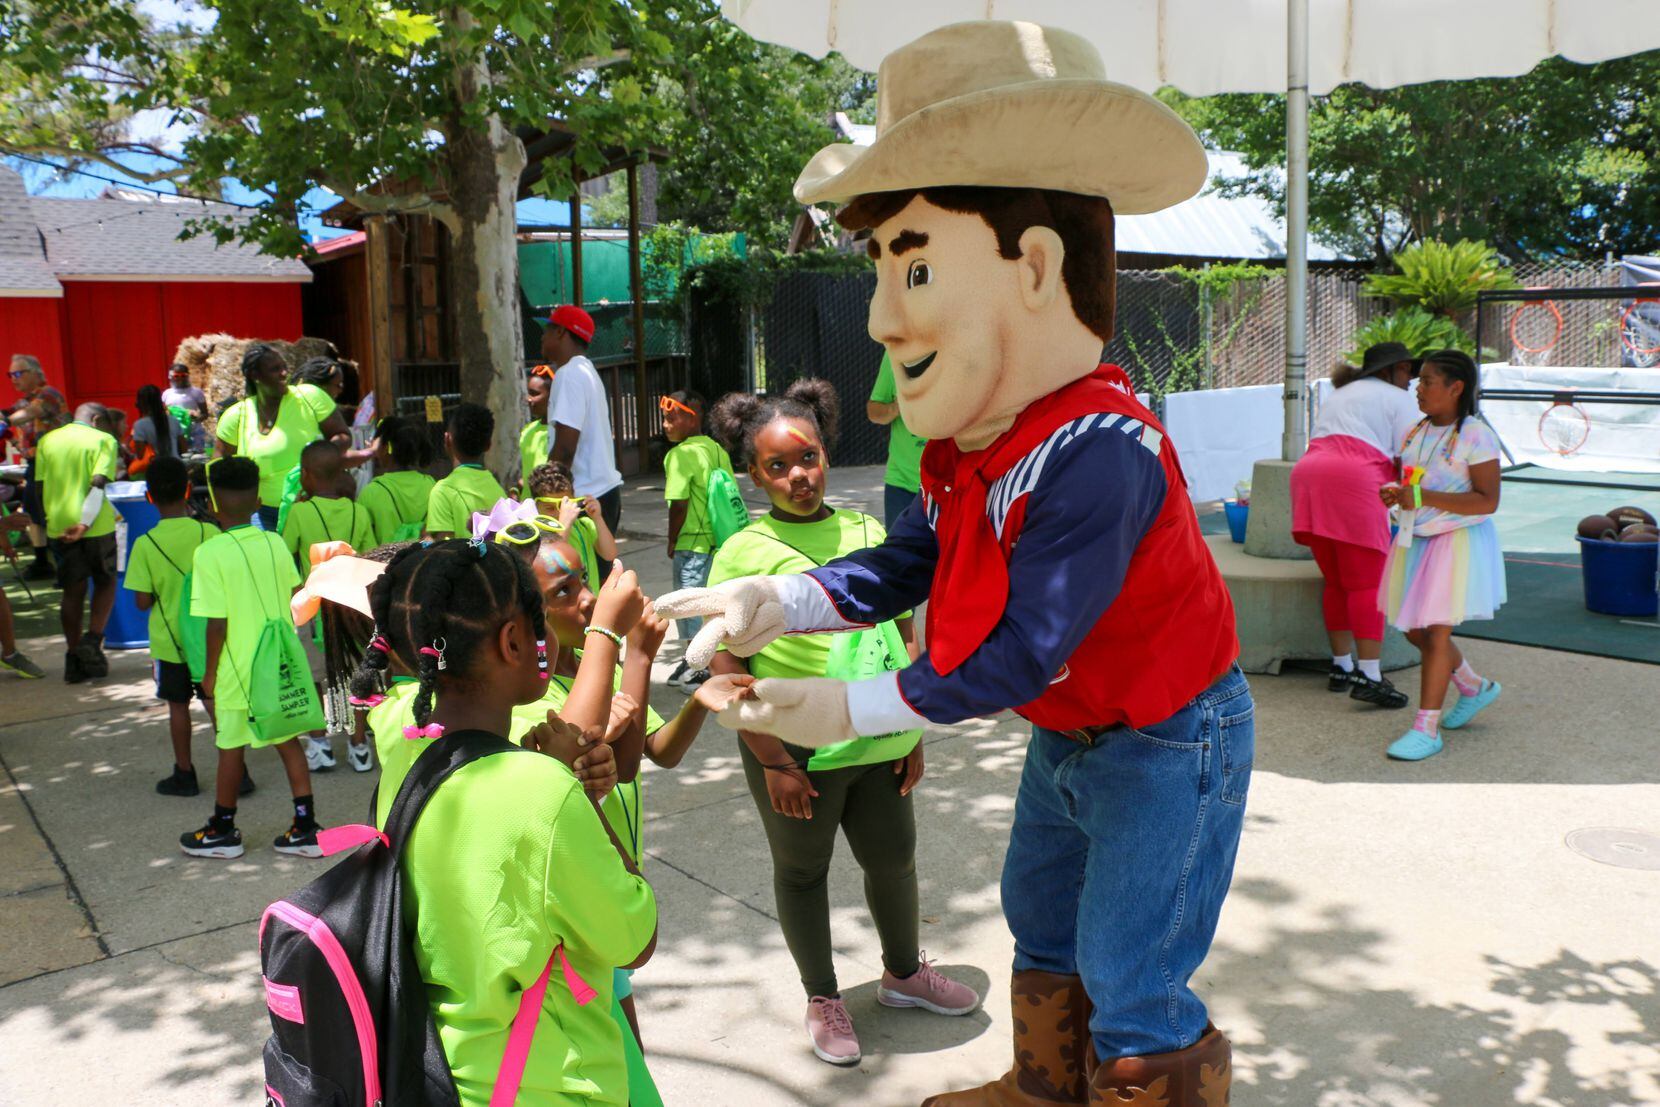 A Big Tex character costume speaks with young children wearing green shirts.